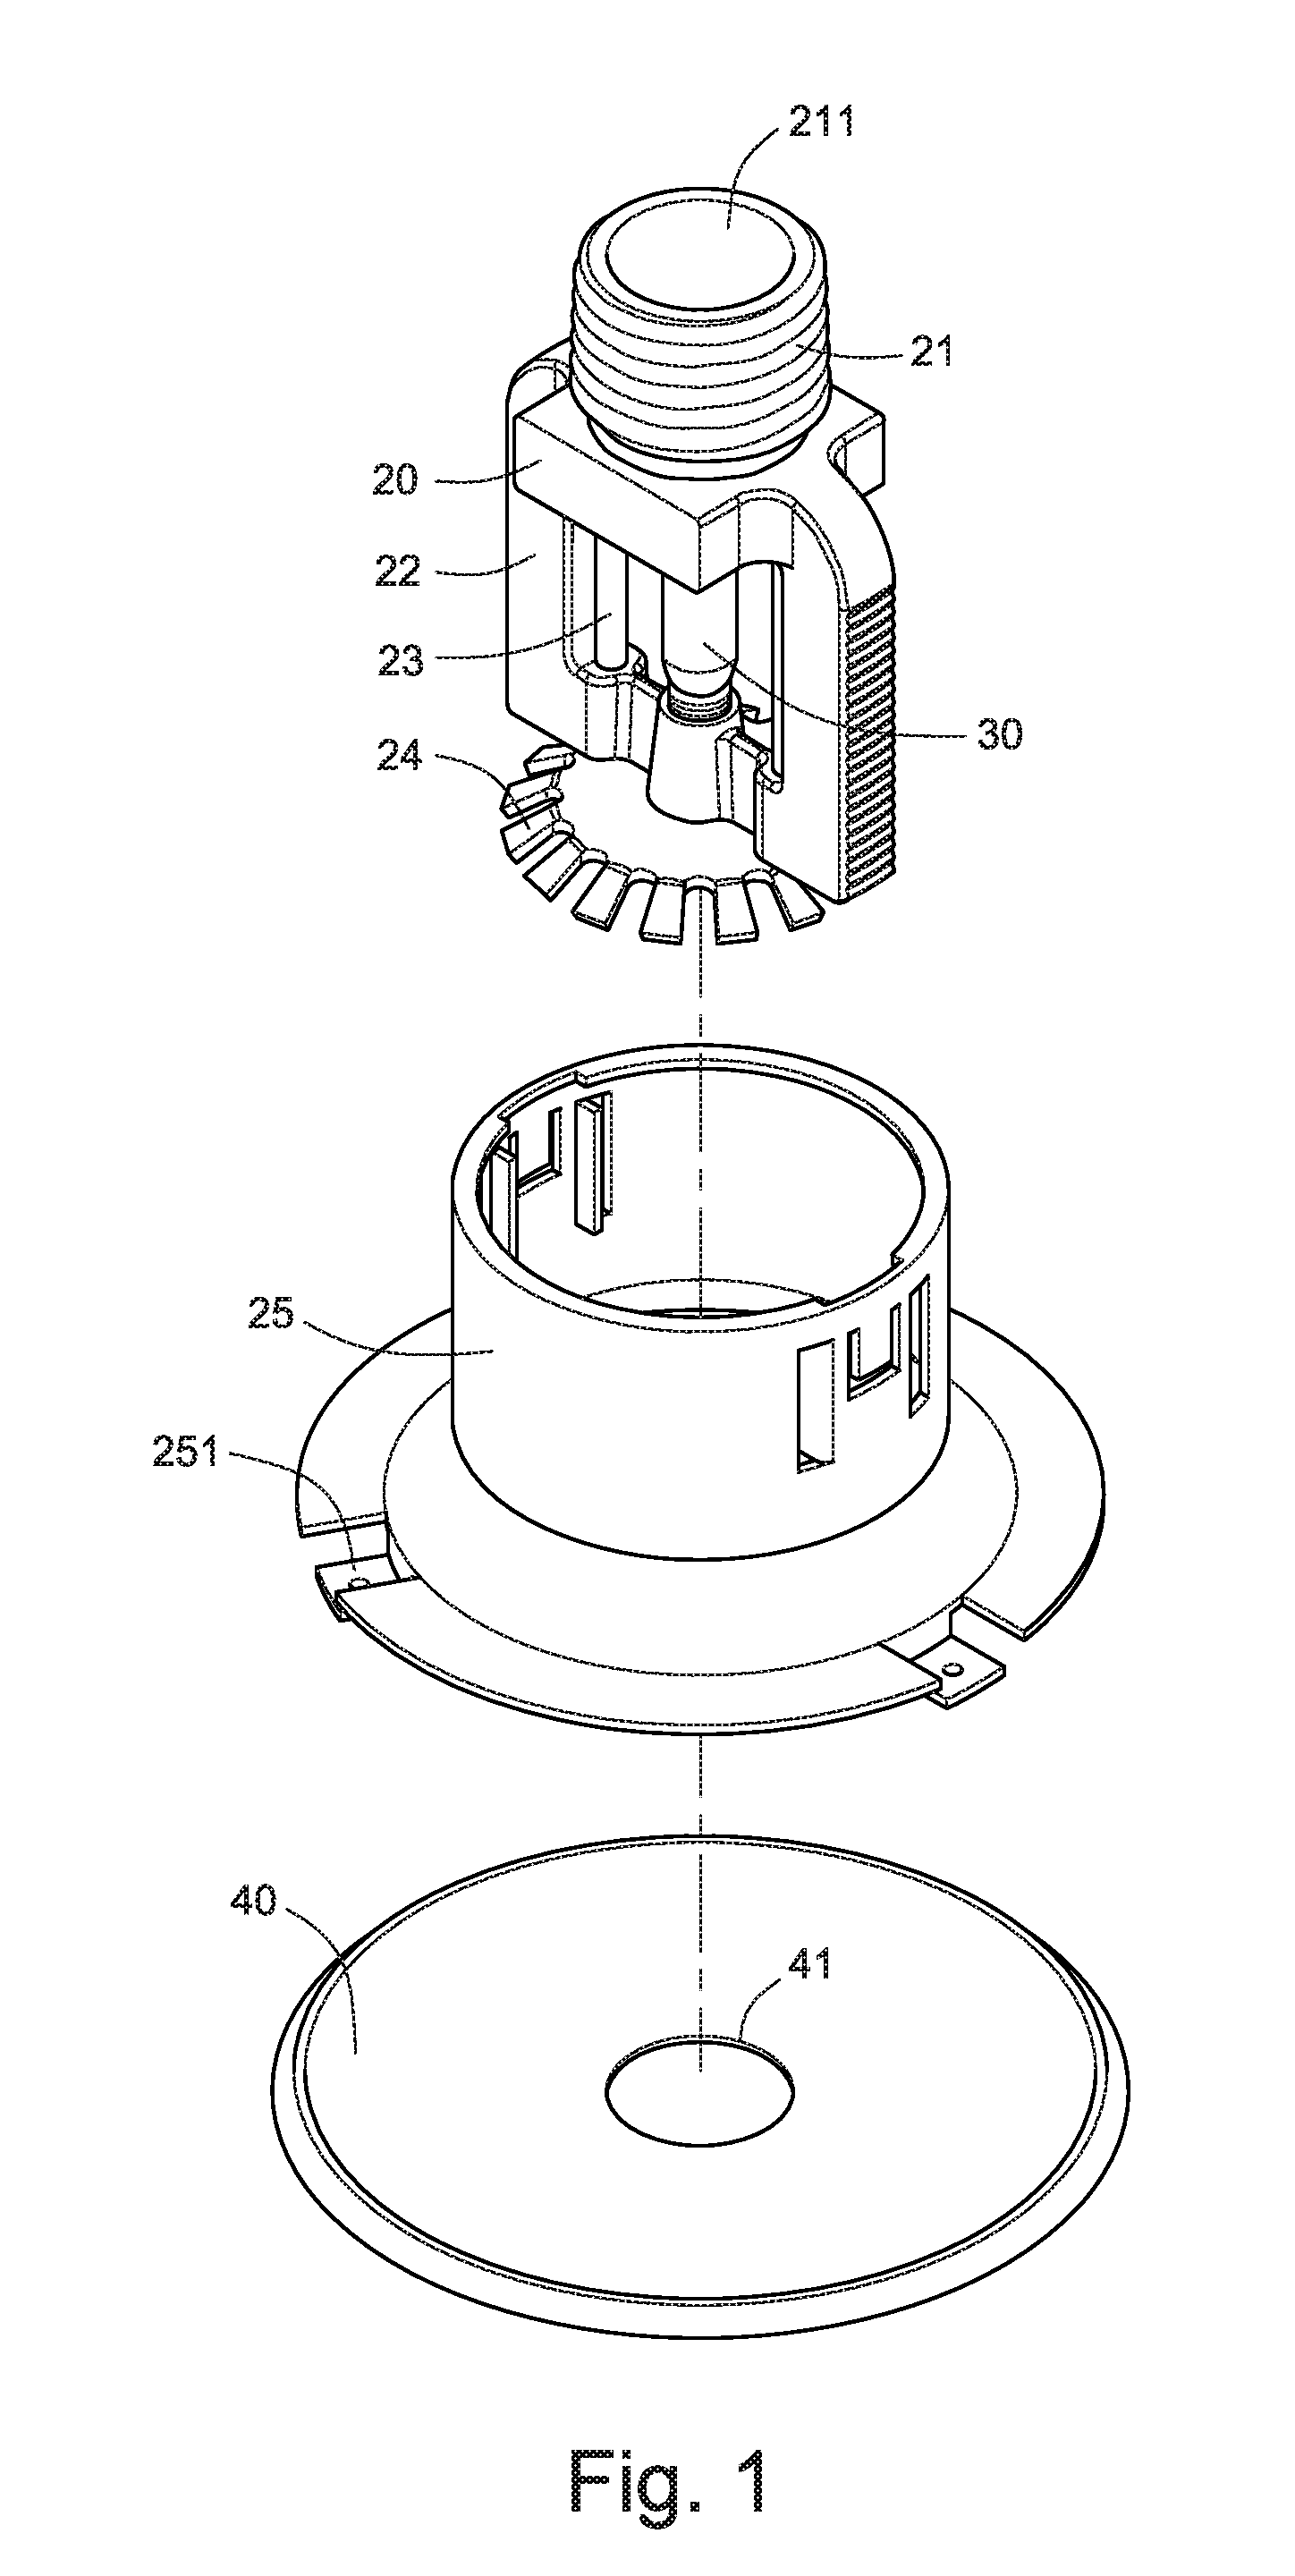 Fire sprinkler capable of detecting a high temperature in a short time